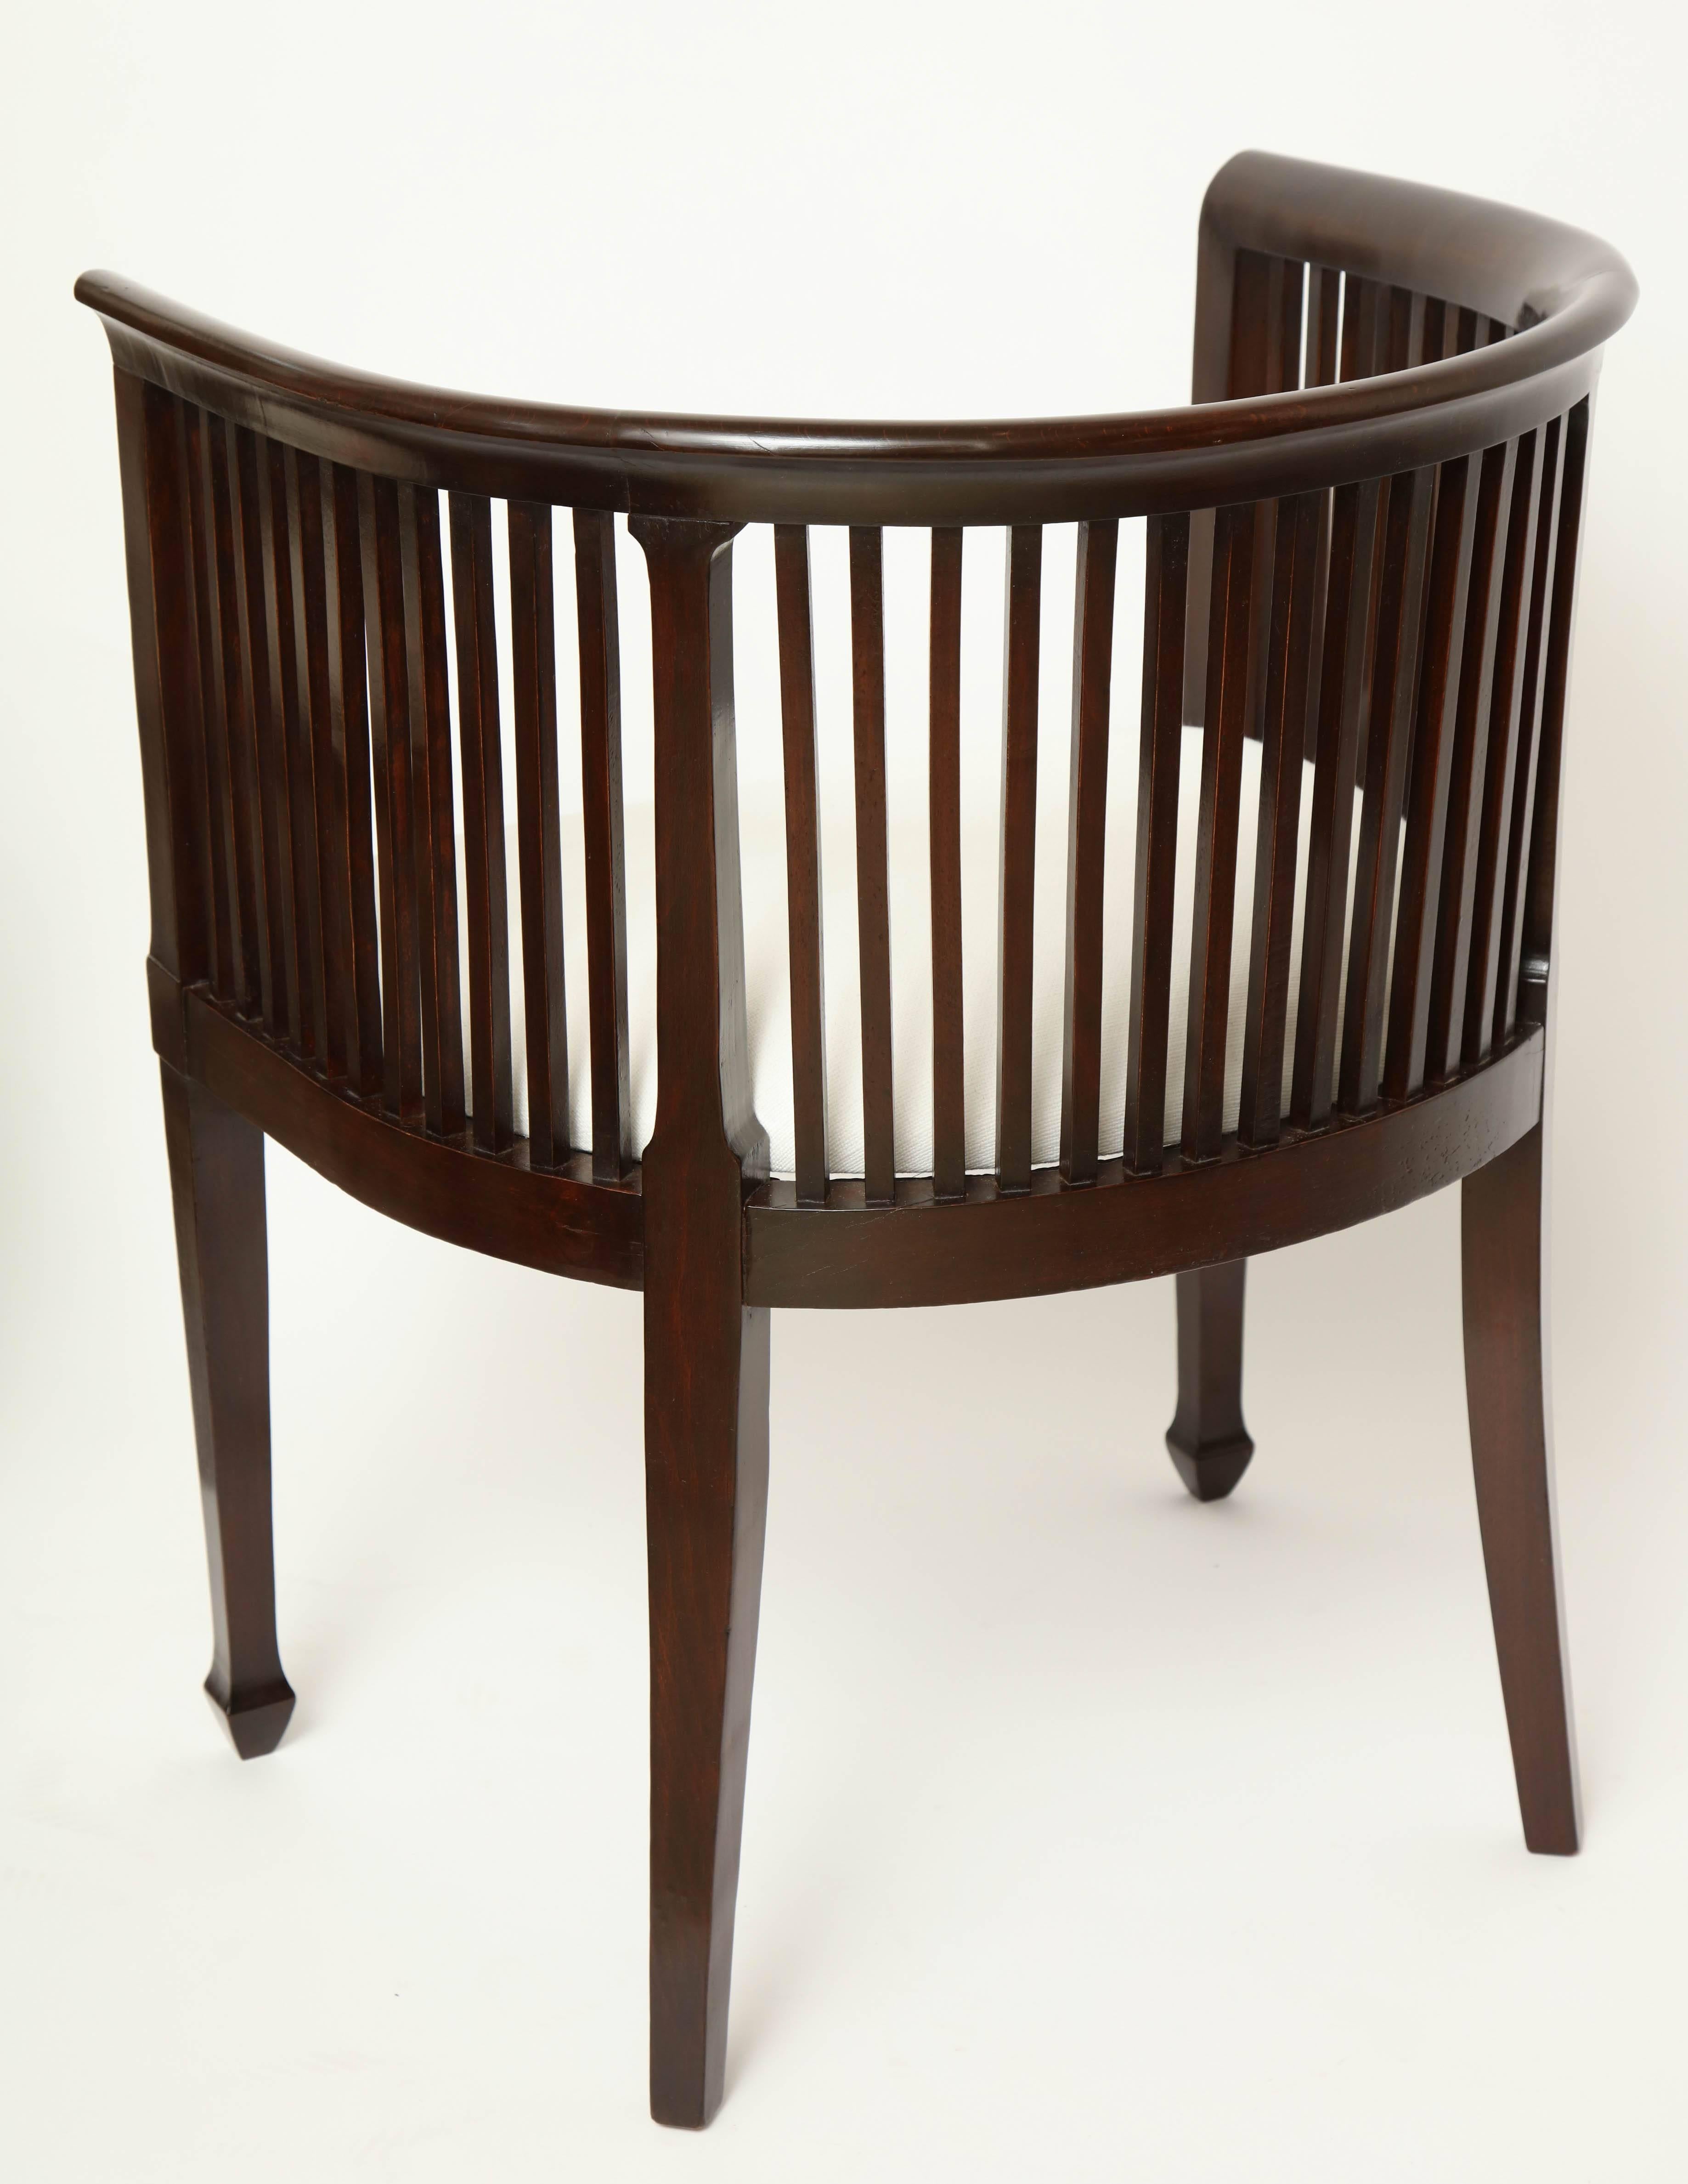 Pair of Slatted and Curved Back Mahogany Chairs, France, circa 1940s 2